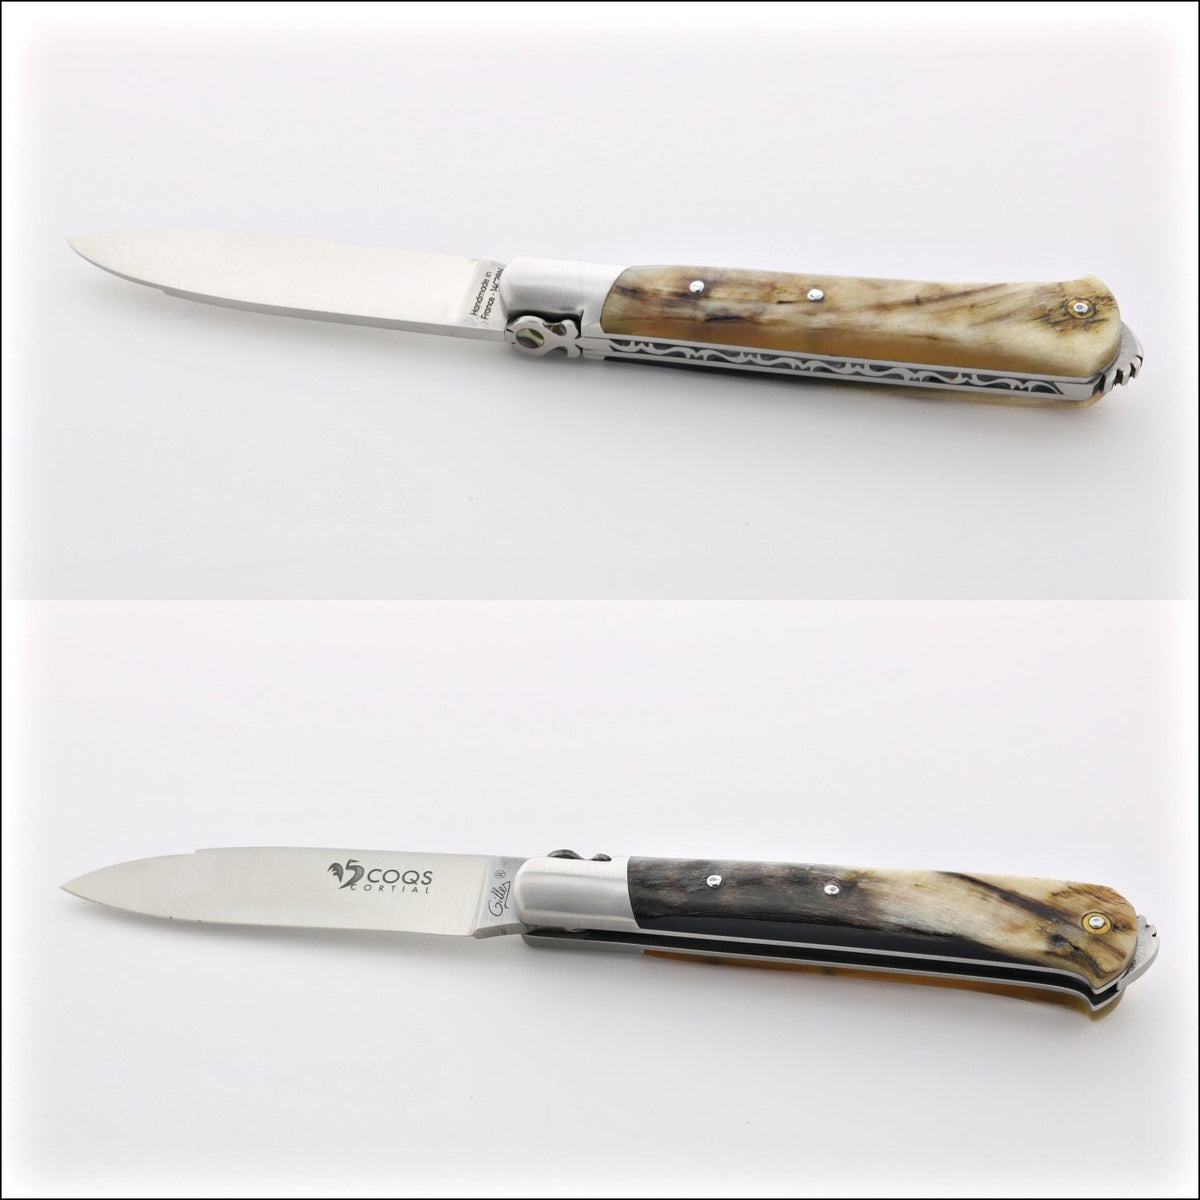 5 Coqs Pocket Knife - Dark Ram Horn &amp; Mother of Pearl Inlay